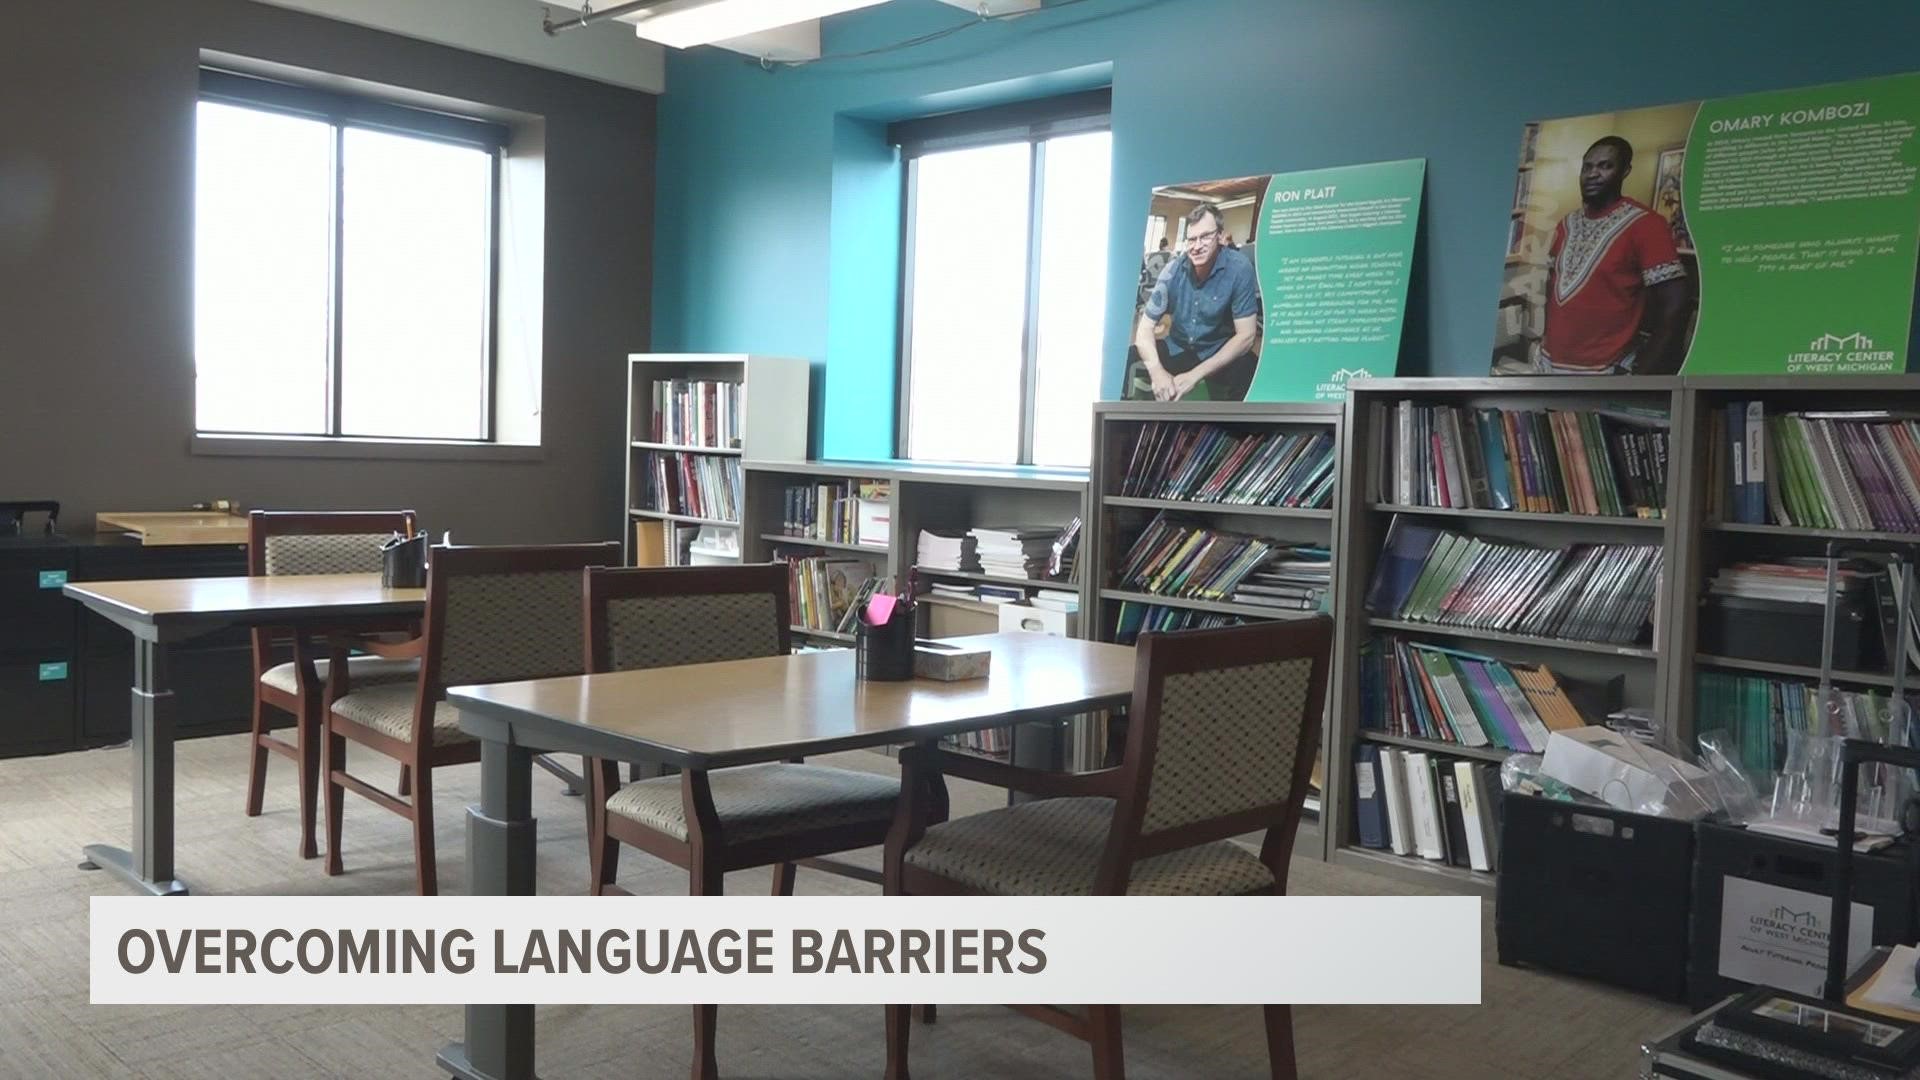 The Literacy Center of West Michigan works with native and non-native English speakers to improve communication confidence.